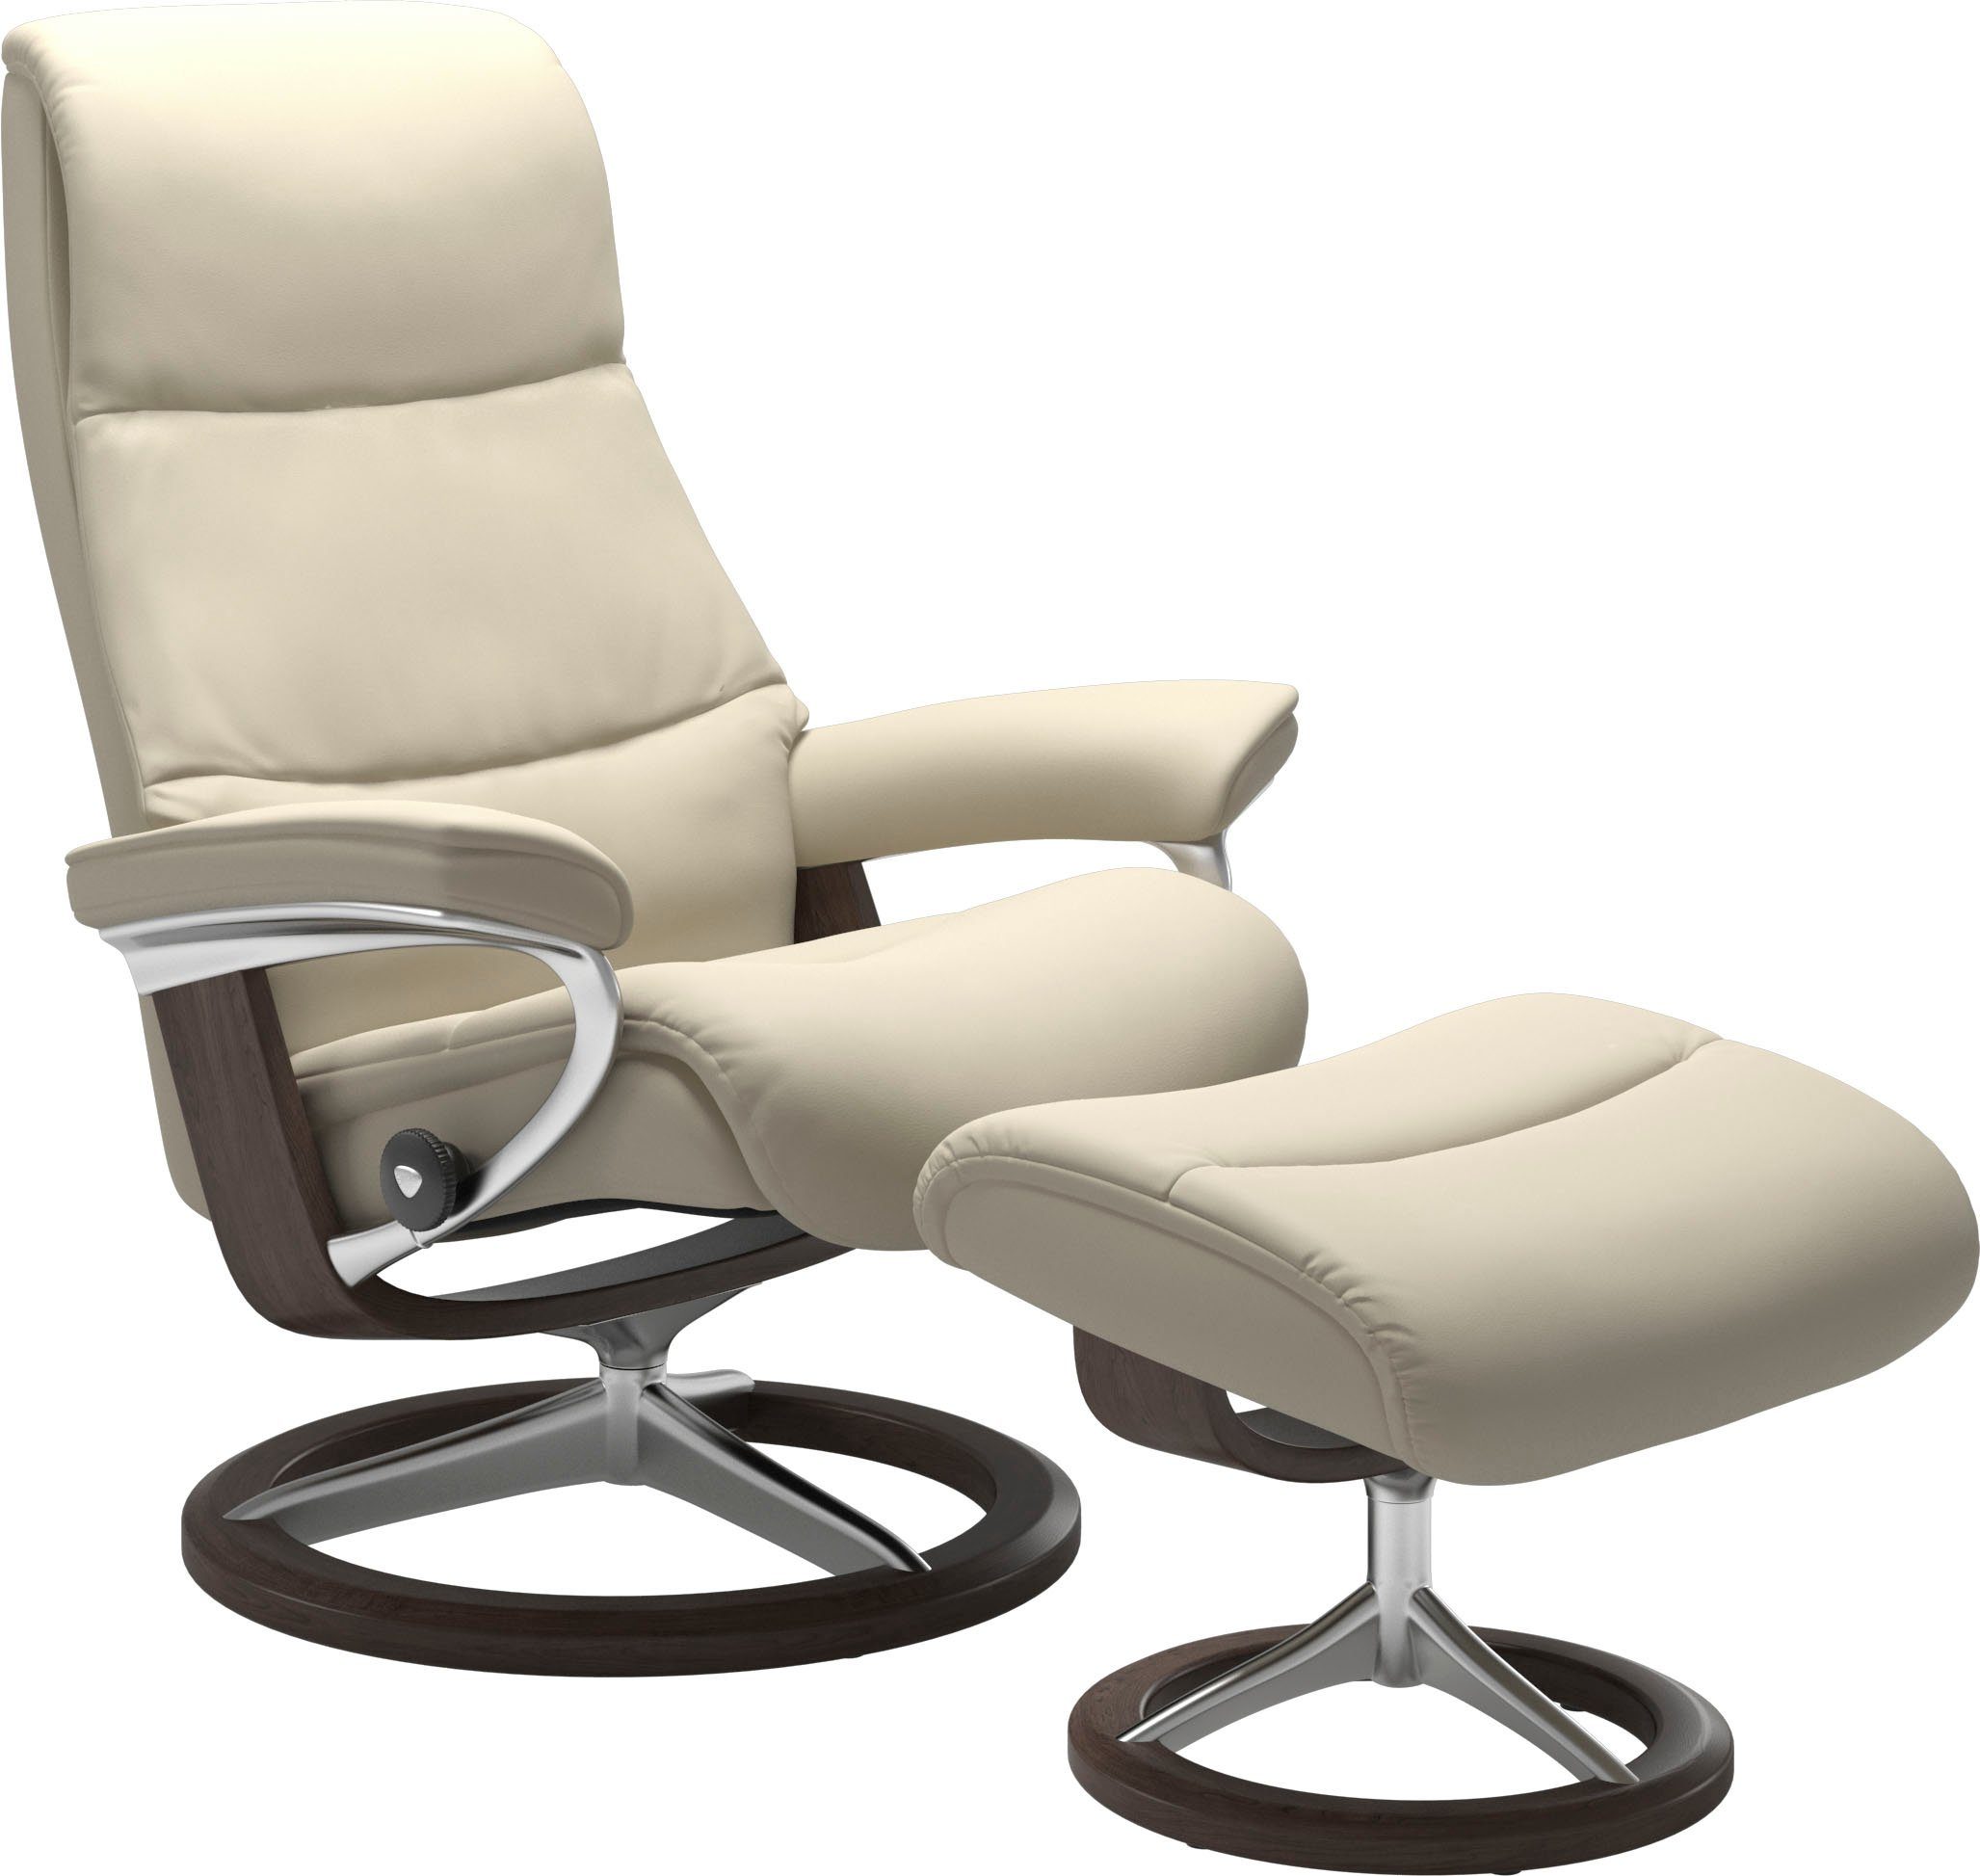 View, mit Relaxsessel Signature S,Gestell Größe Stressless® Wenge Base,